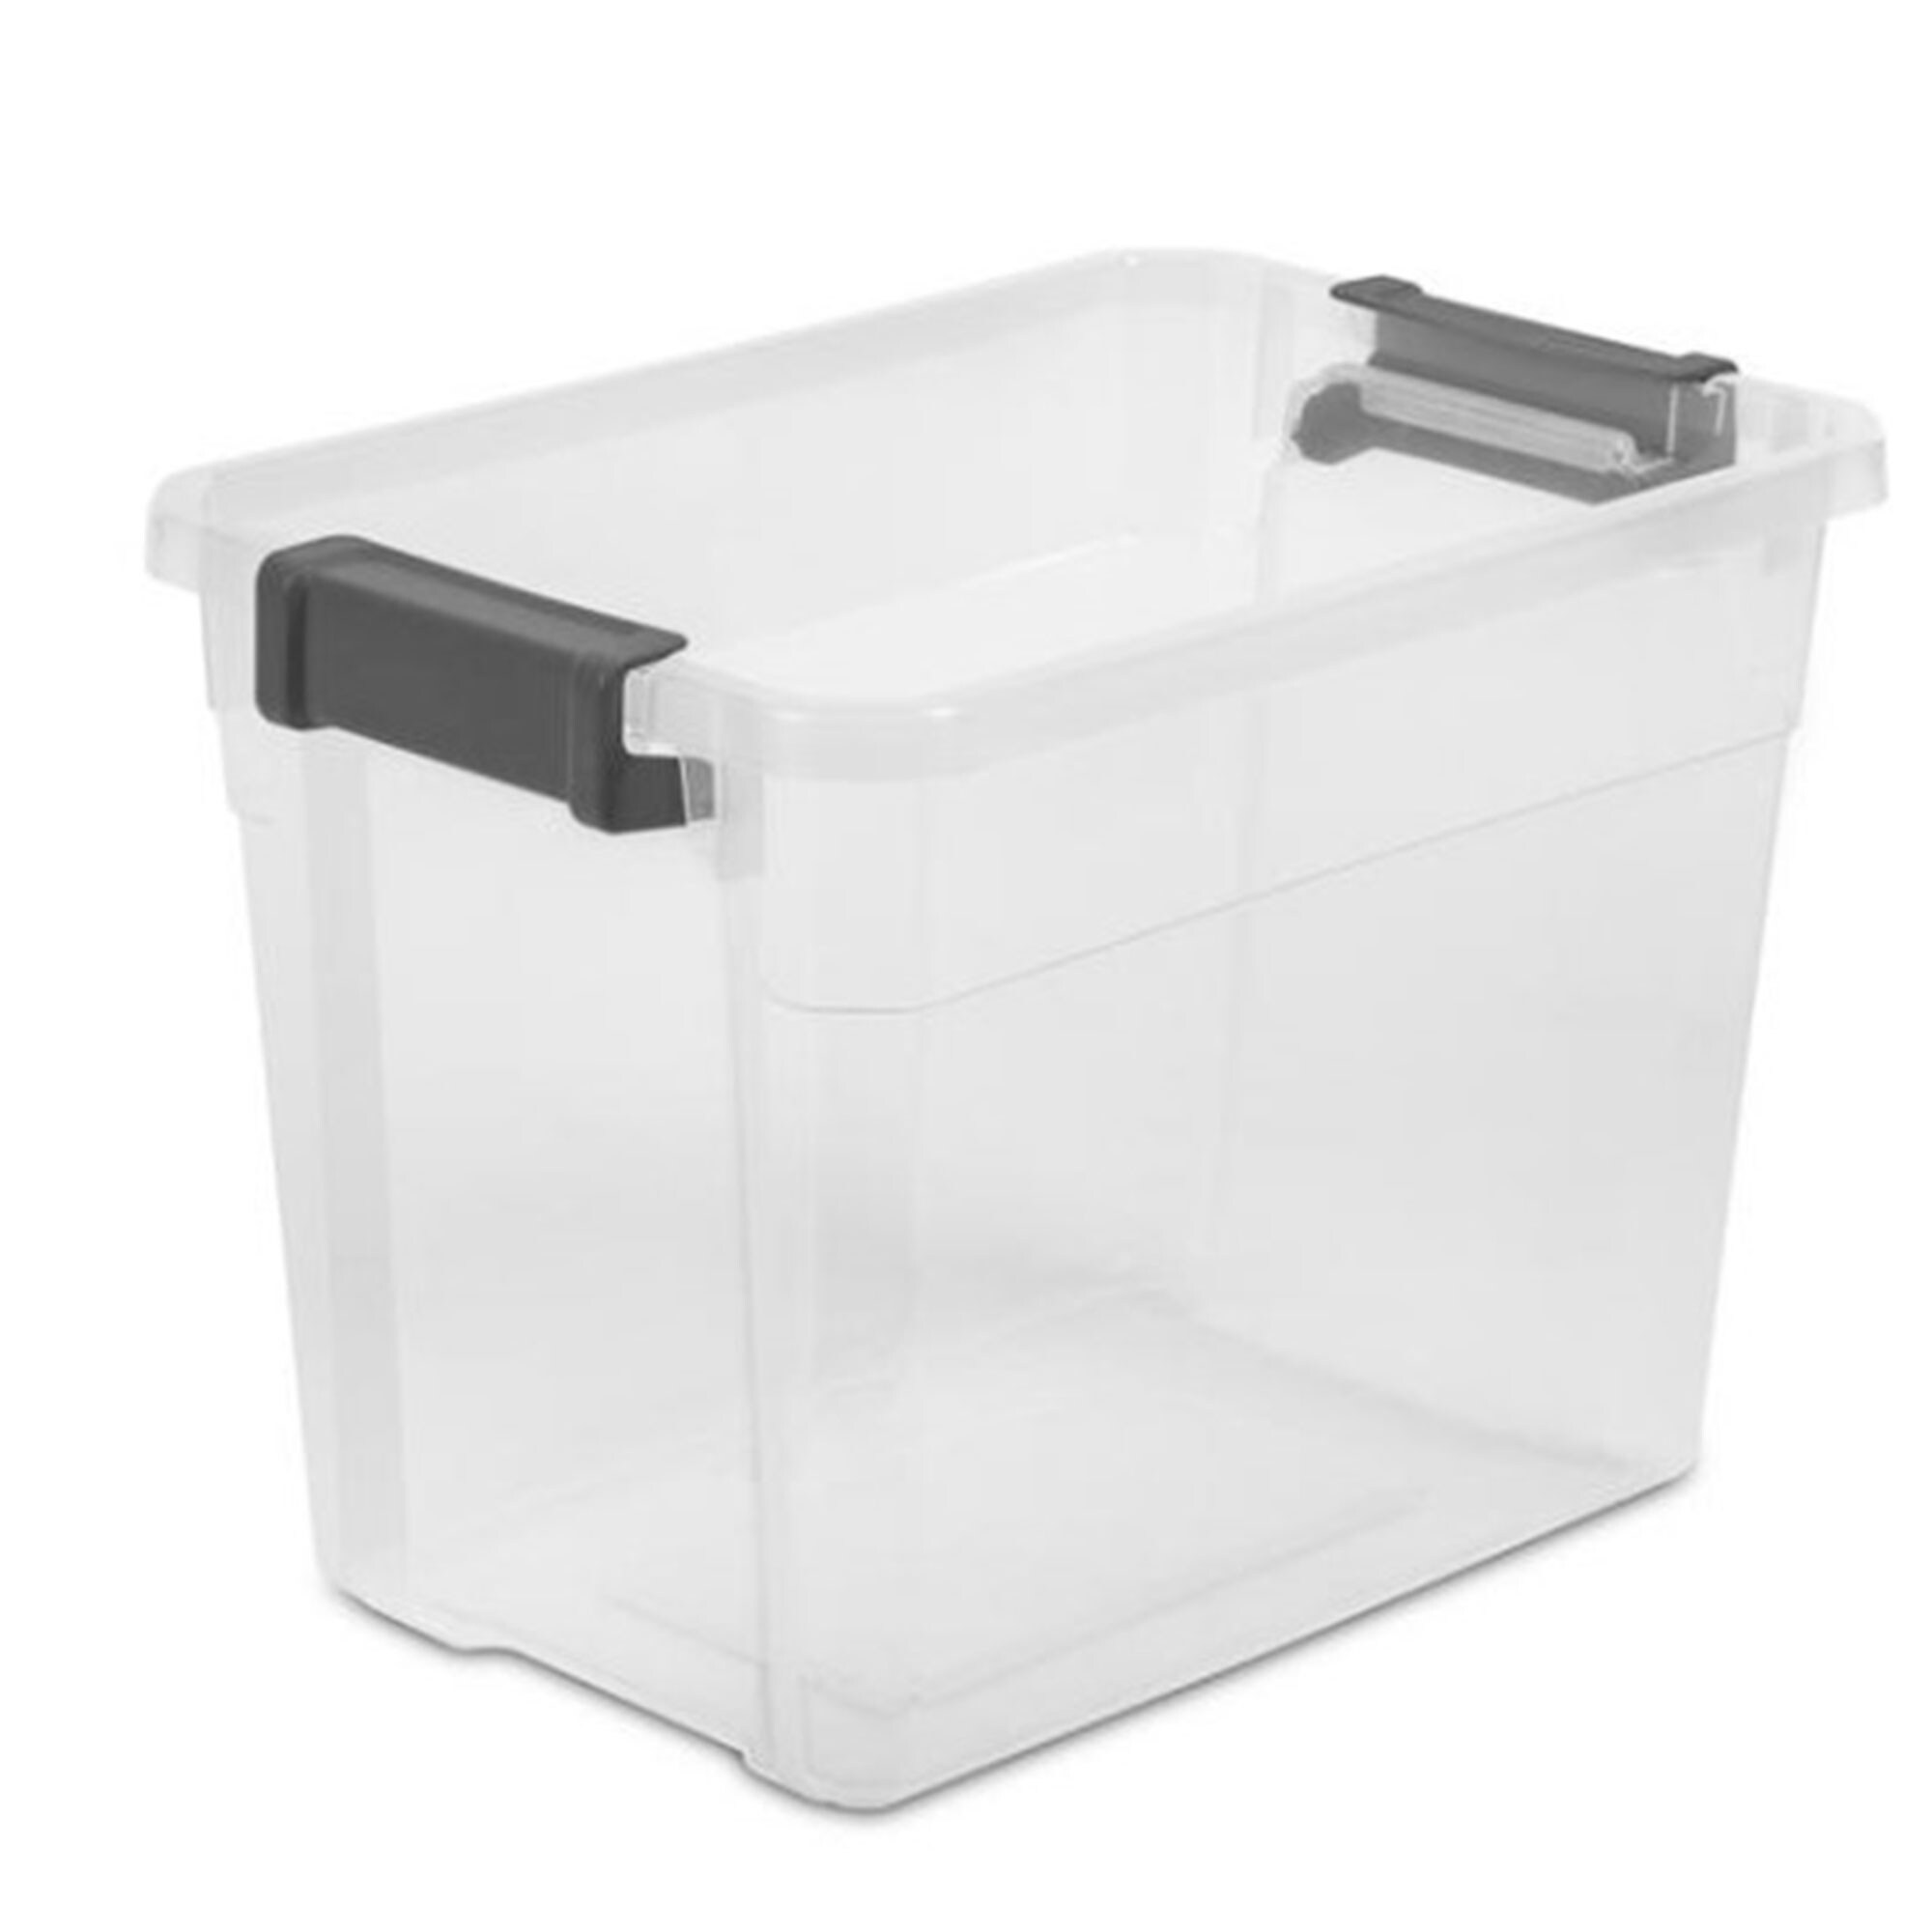 https://ak1.ostkcdn.com/images/products/is/images/direct/ae7ce01556ddcf615525bacd328cf837dd158f8a/Sterilite-30-Qt-Clear-Plastic-Stackable-Storage-Bin-w--Grey-Latch-Lid%2C-12-Pack.jpg